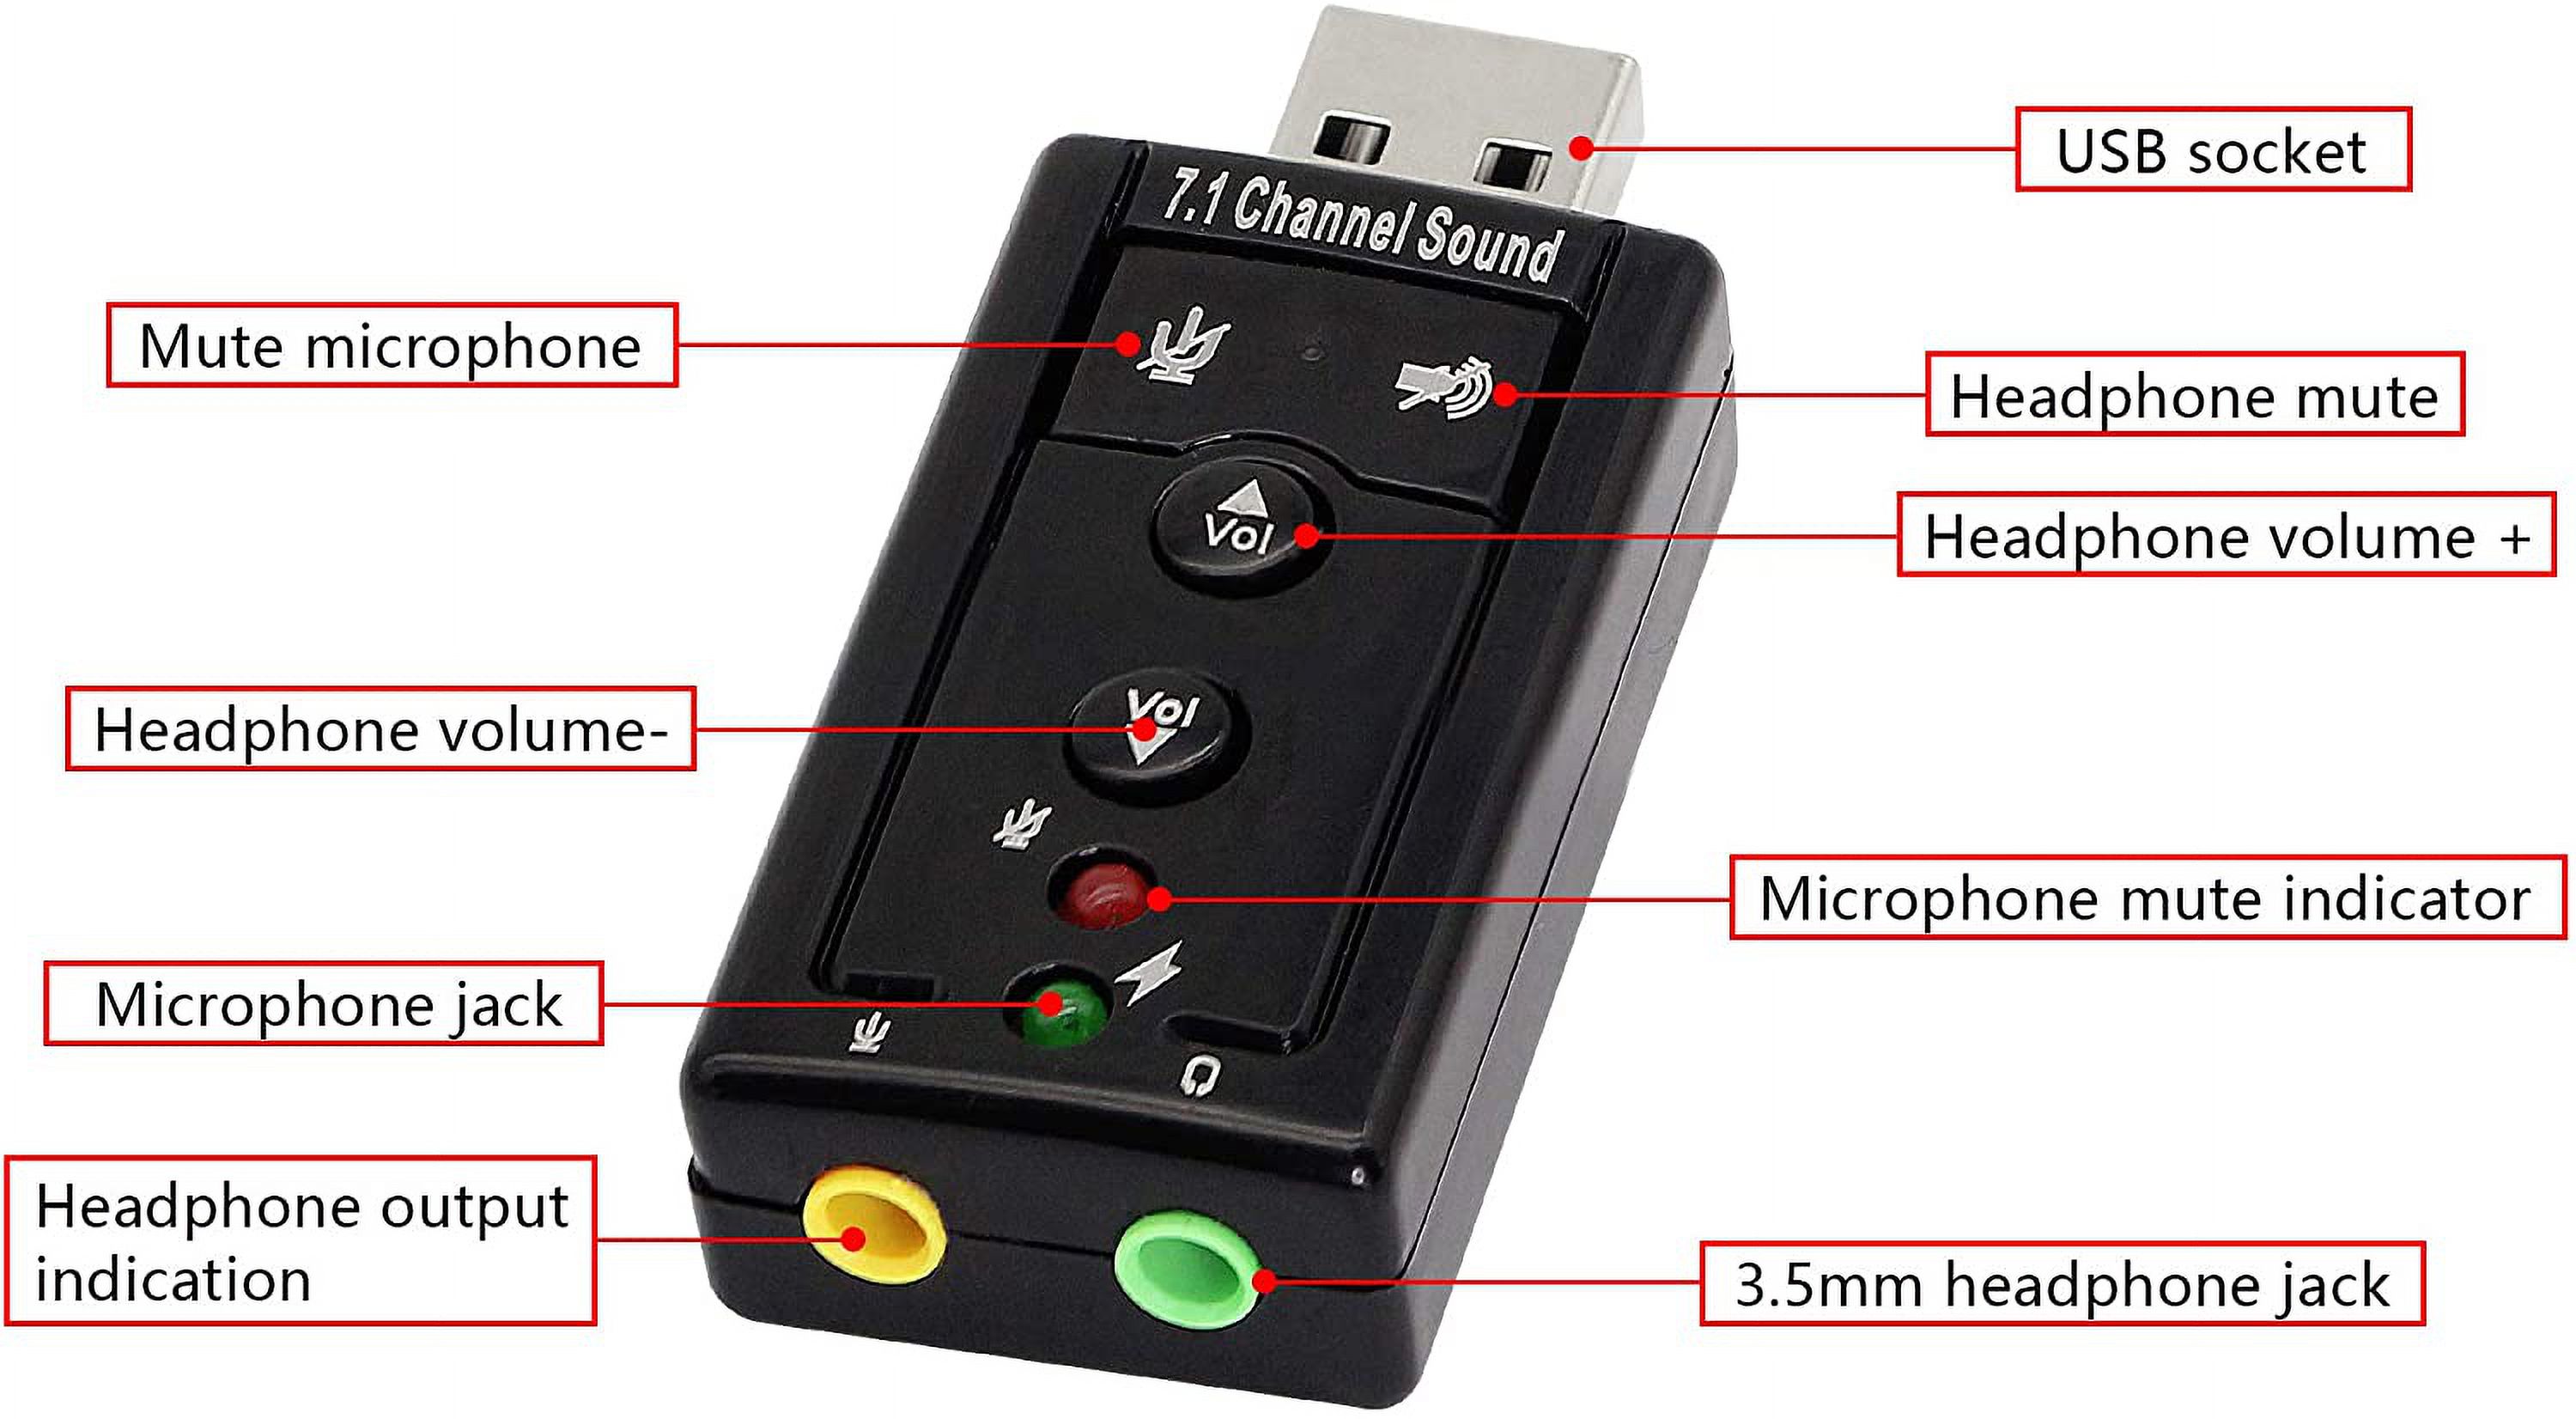 7.1 USB Stereo Audio Adapter External Sound Card - Sound card - stereo - USB 2.0 - ICUSBAUDIO7,Black - image 5 of 6